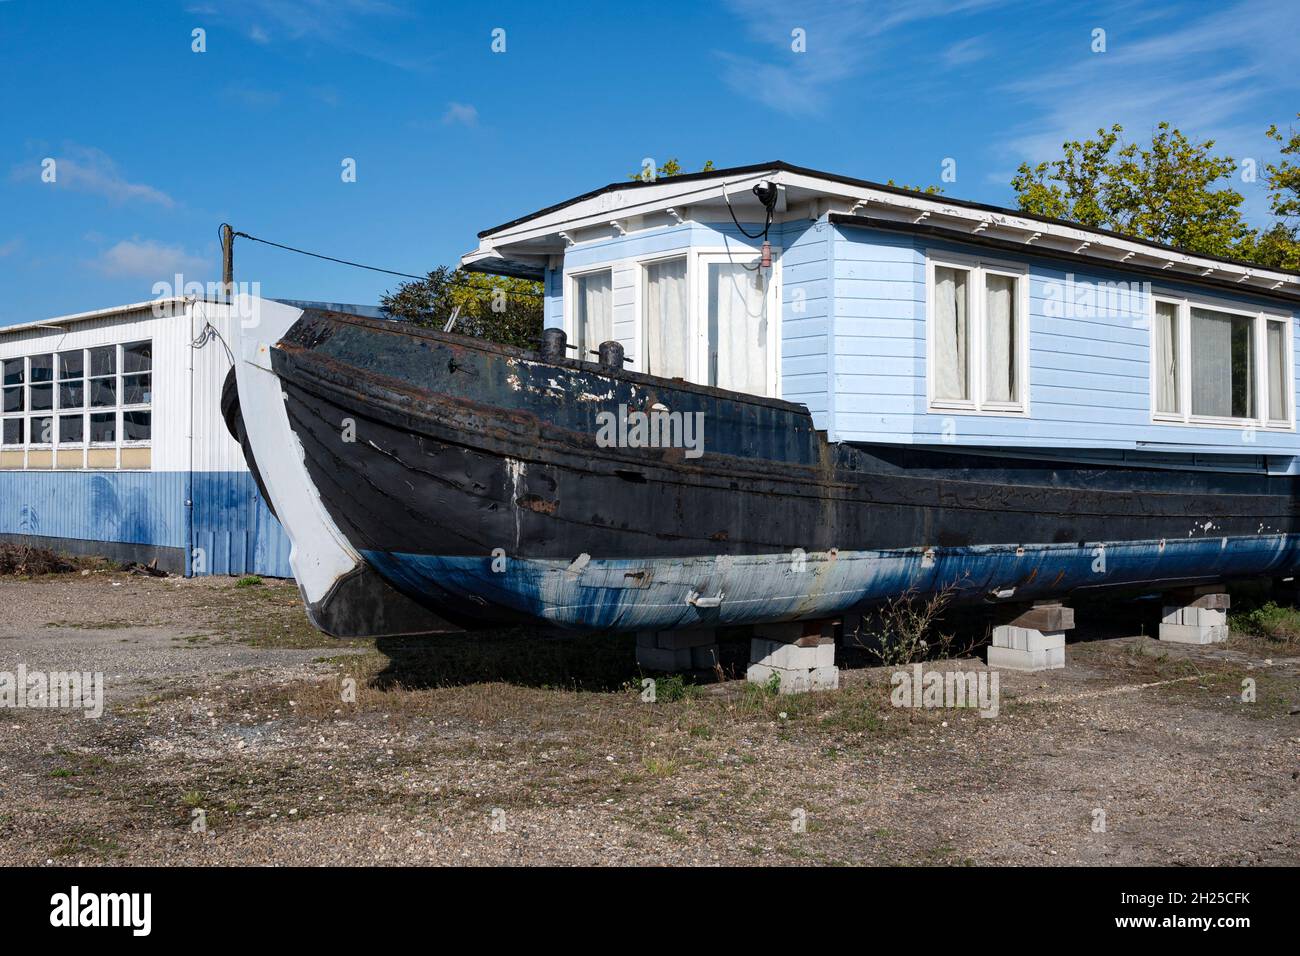 An old houseboat parked on the pleasure boat docks at the bassins à flot, Bordeaux, France Stock Photo